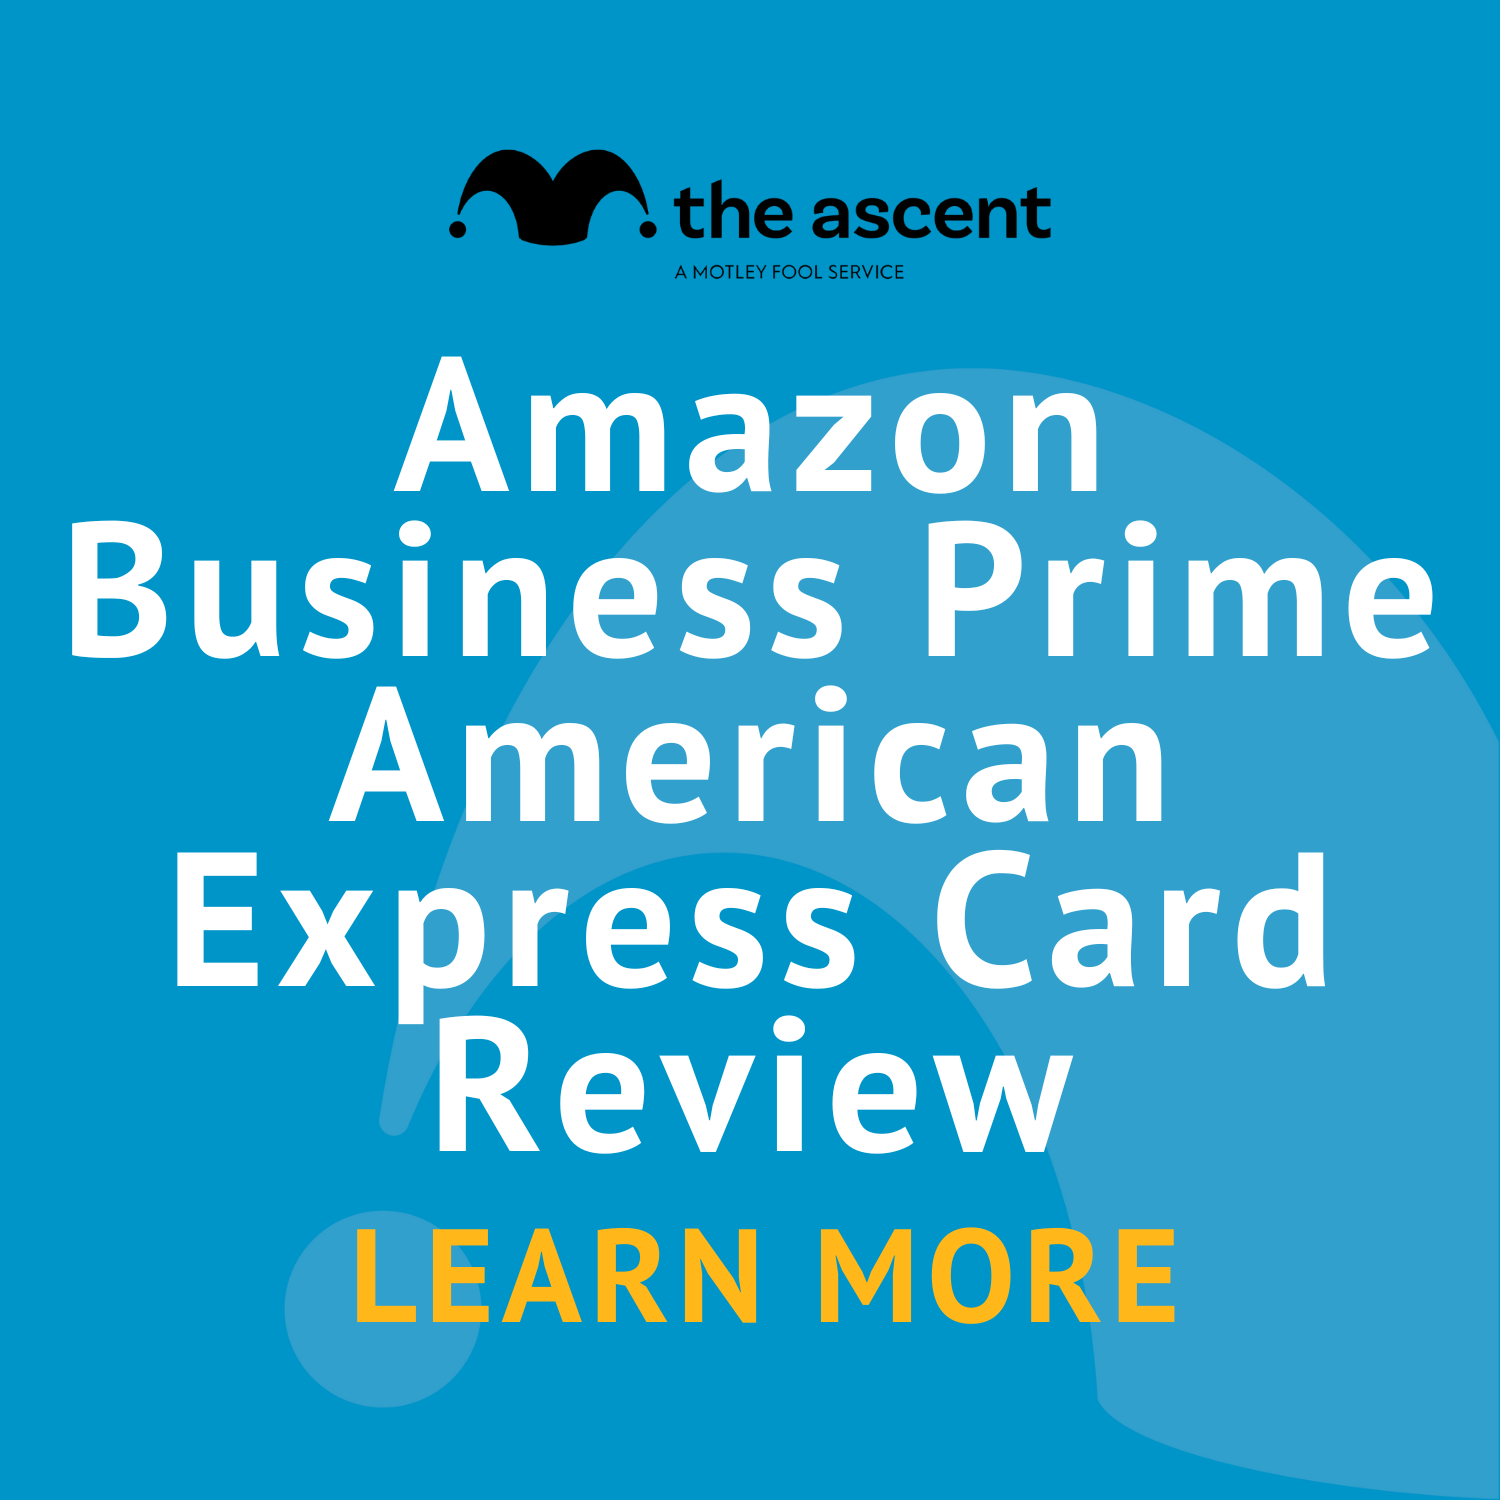 INR 1500 Amazon Gift Card for Credit Card Applications